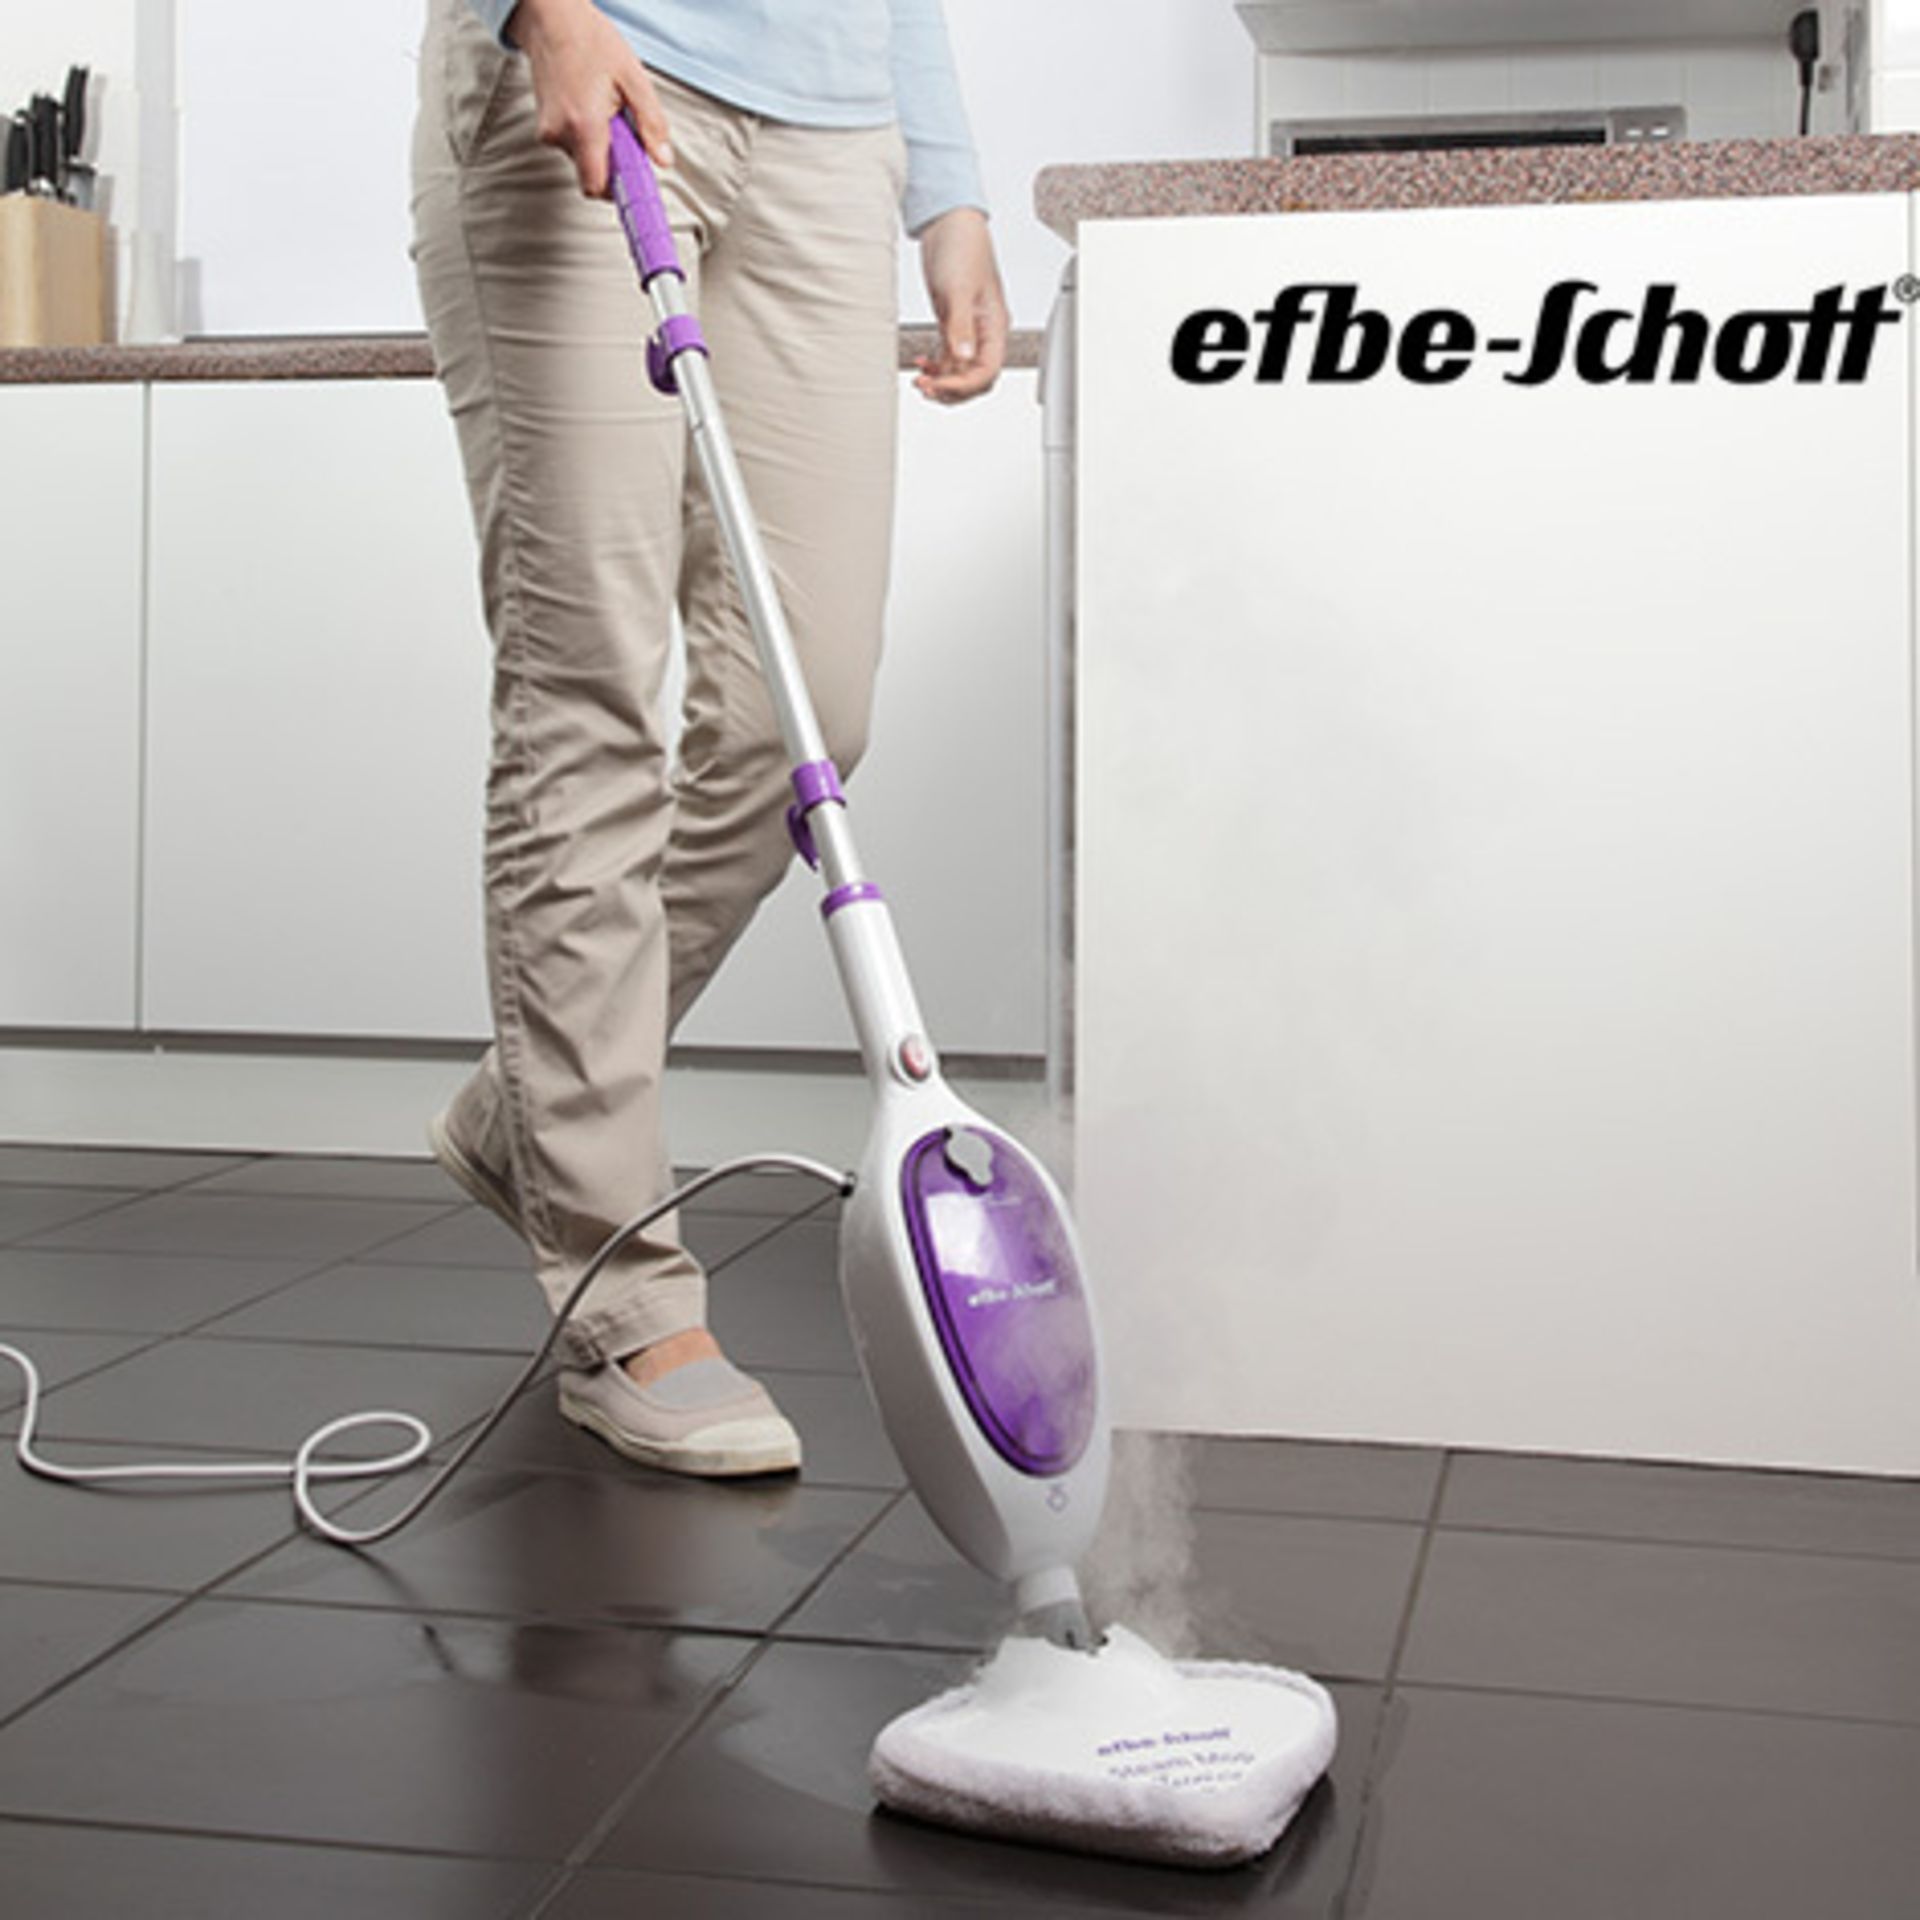 V Brand New Efbe-Schott Steam Mop (New And Boxed) Colours And Model May Vary RRP59.99 X 2 Bid